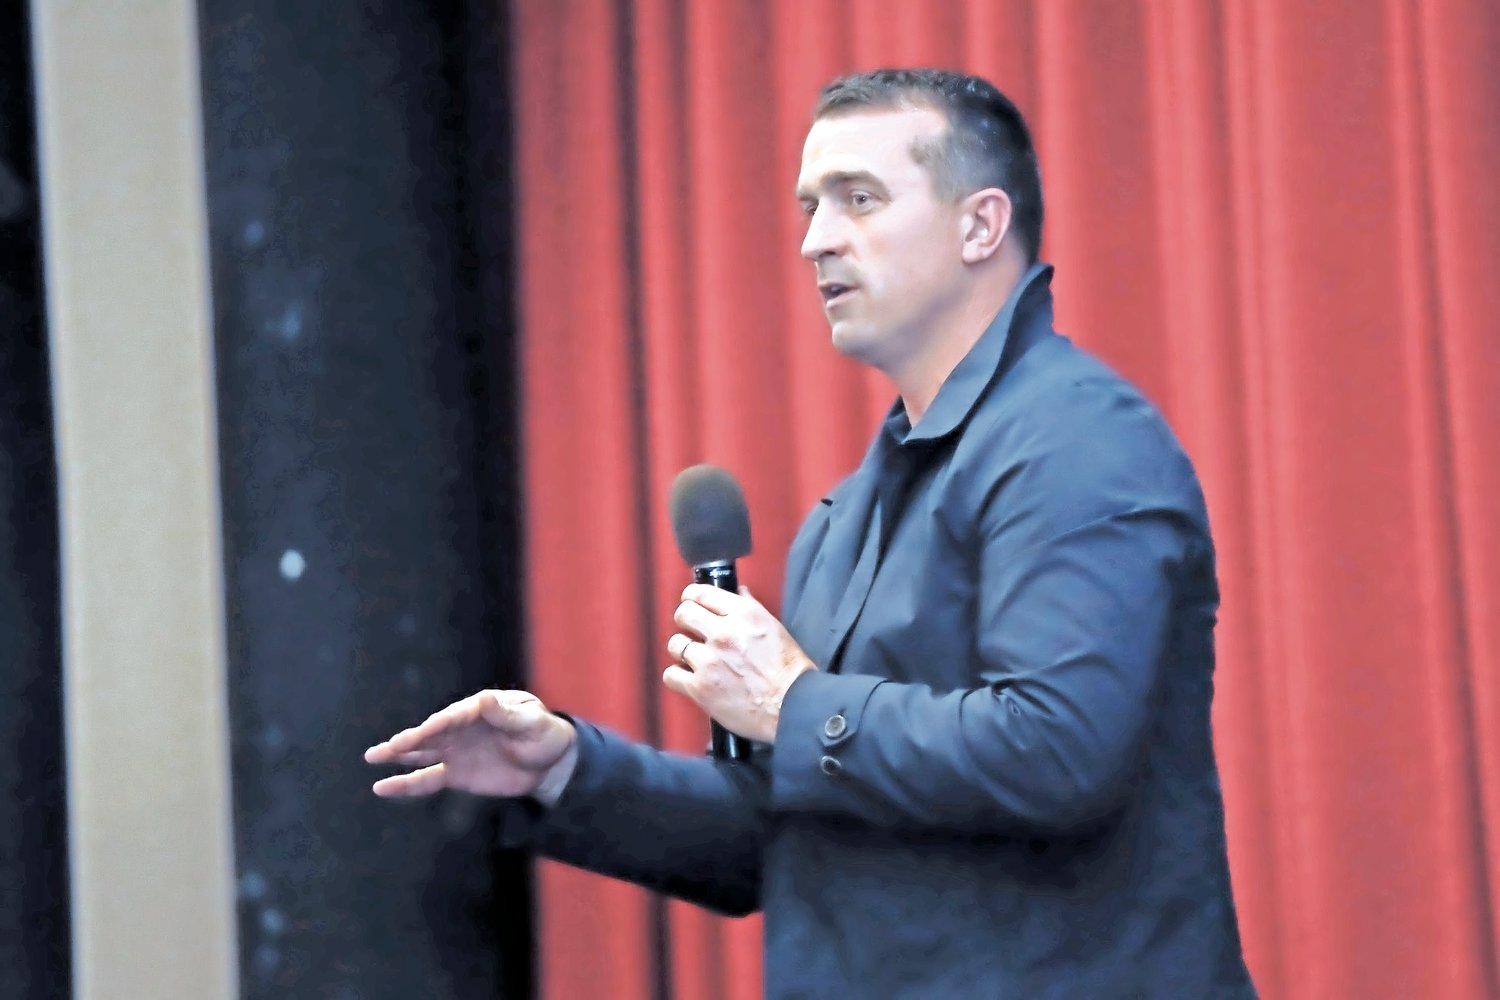 Former NBA player Chris Herren has spoken at schools across Long Island ­— above, in Rockville Centre in 2018 — and around the country.